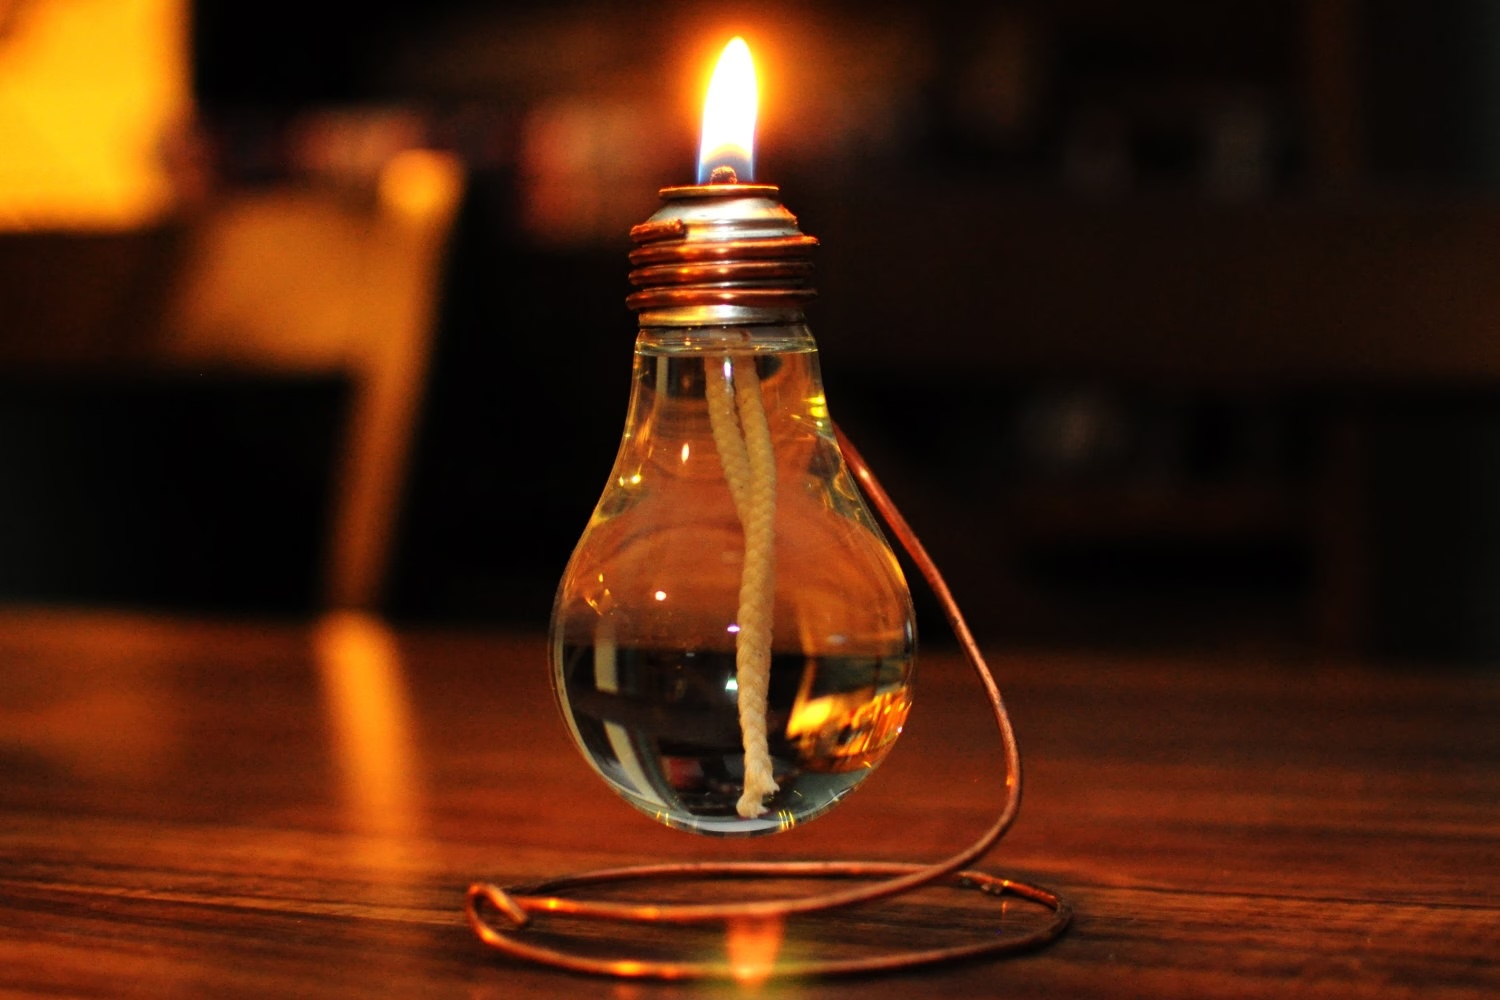 How To Dispose Of Lamp Oil